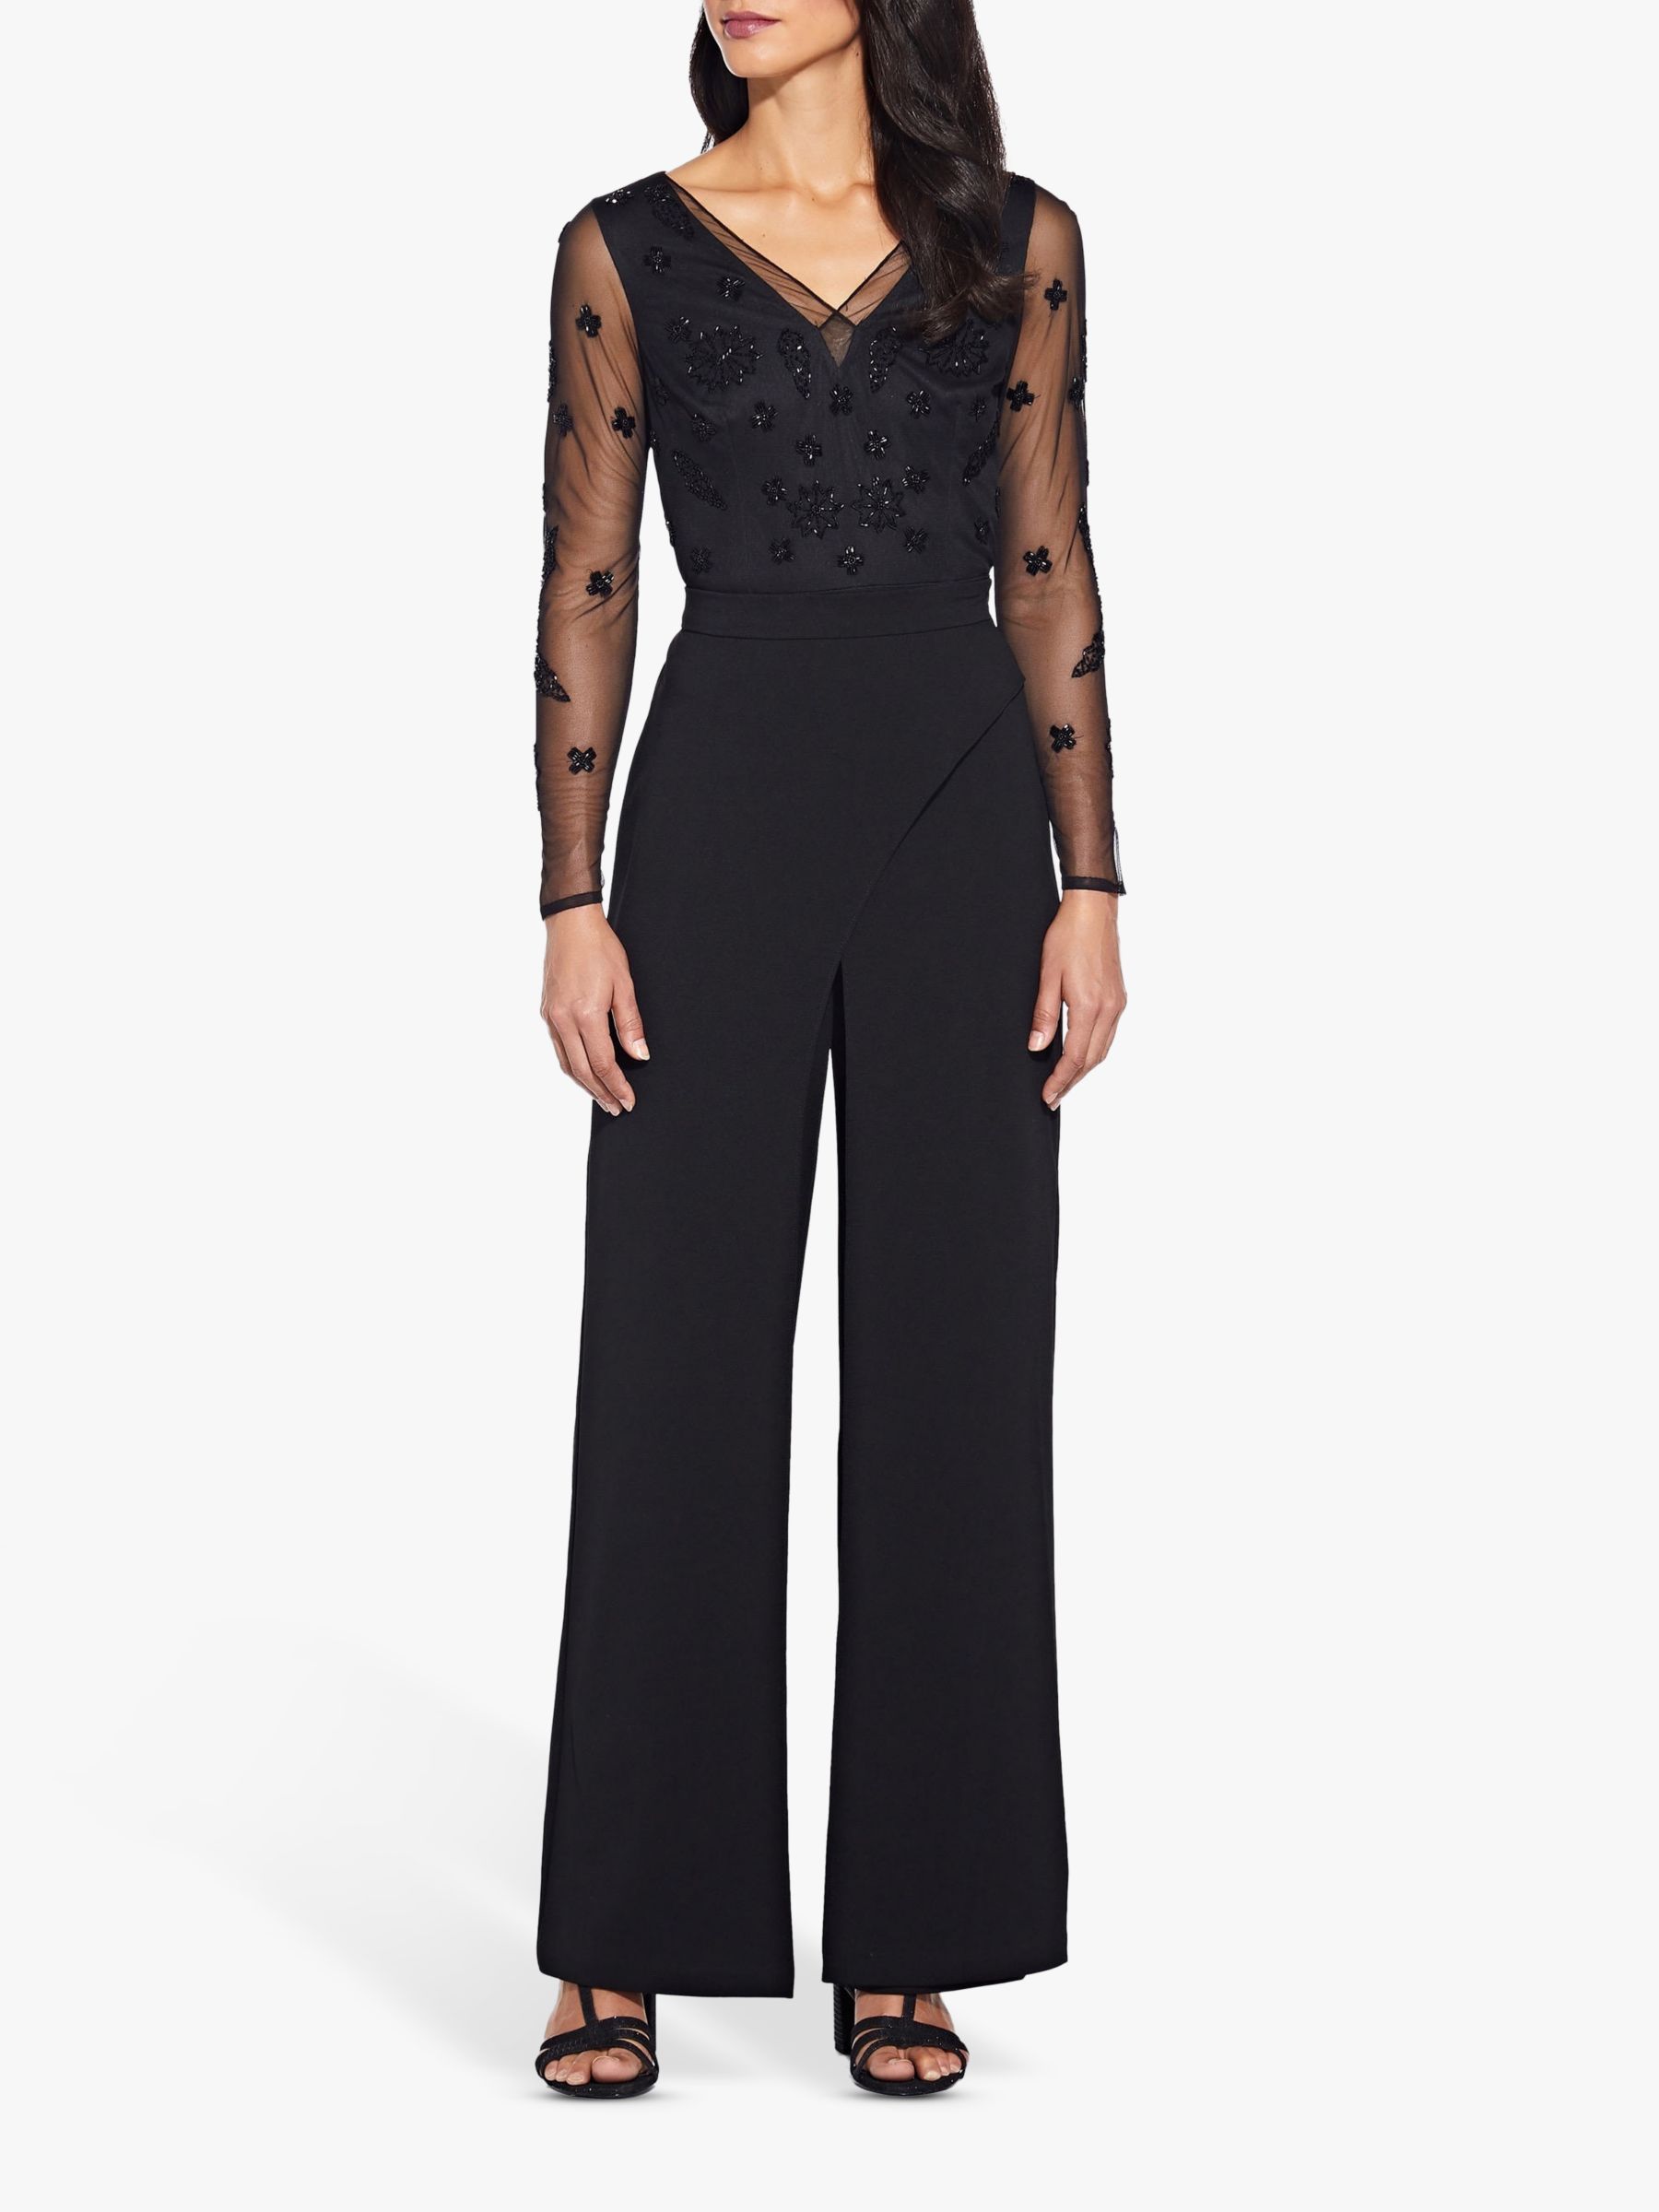 Adrianna Papell Crepe Trousers, Black at John Lewis & Partners